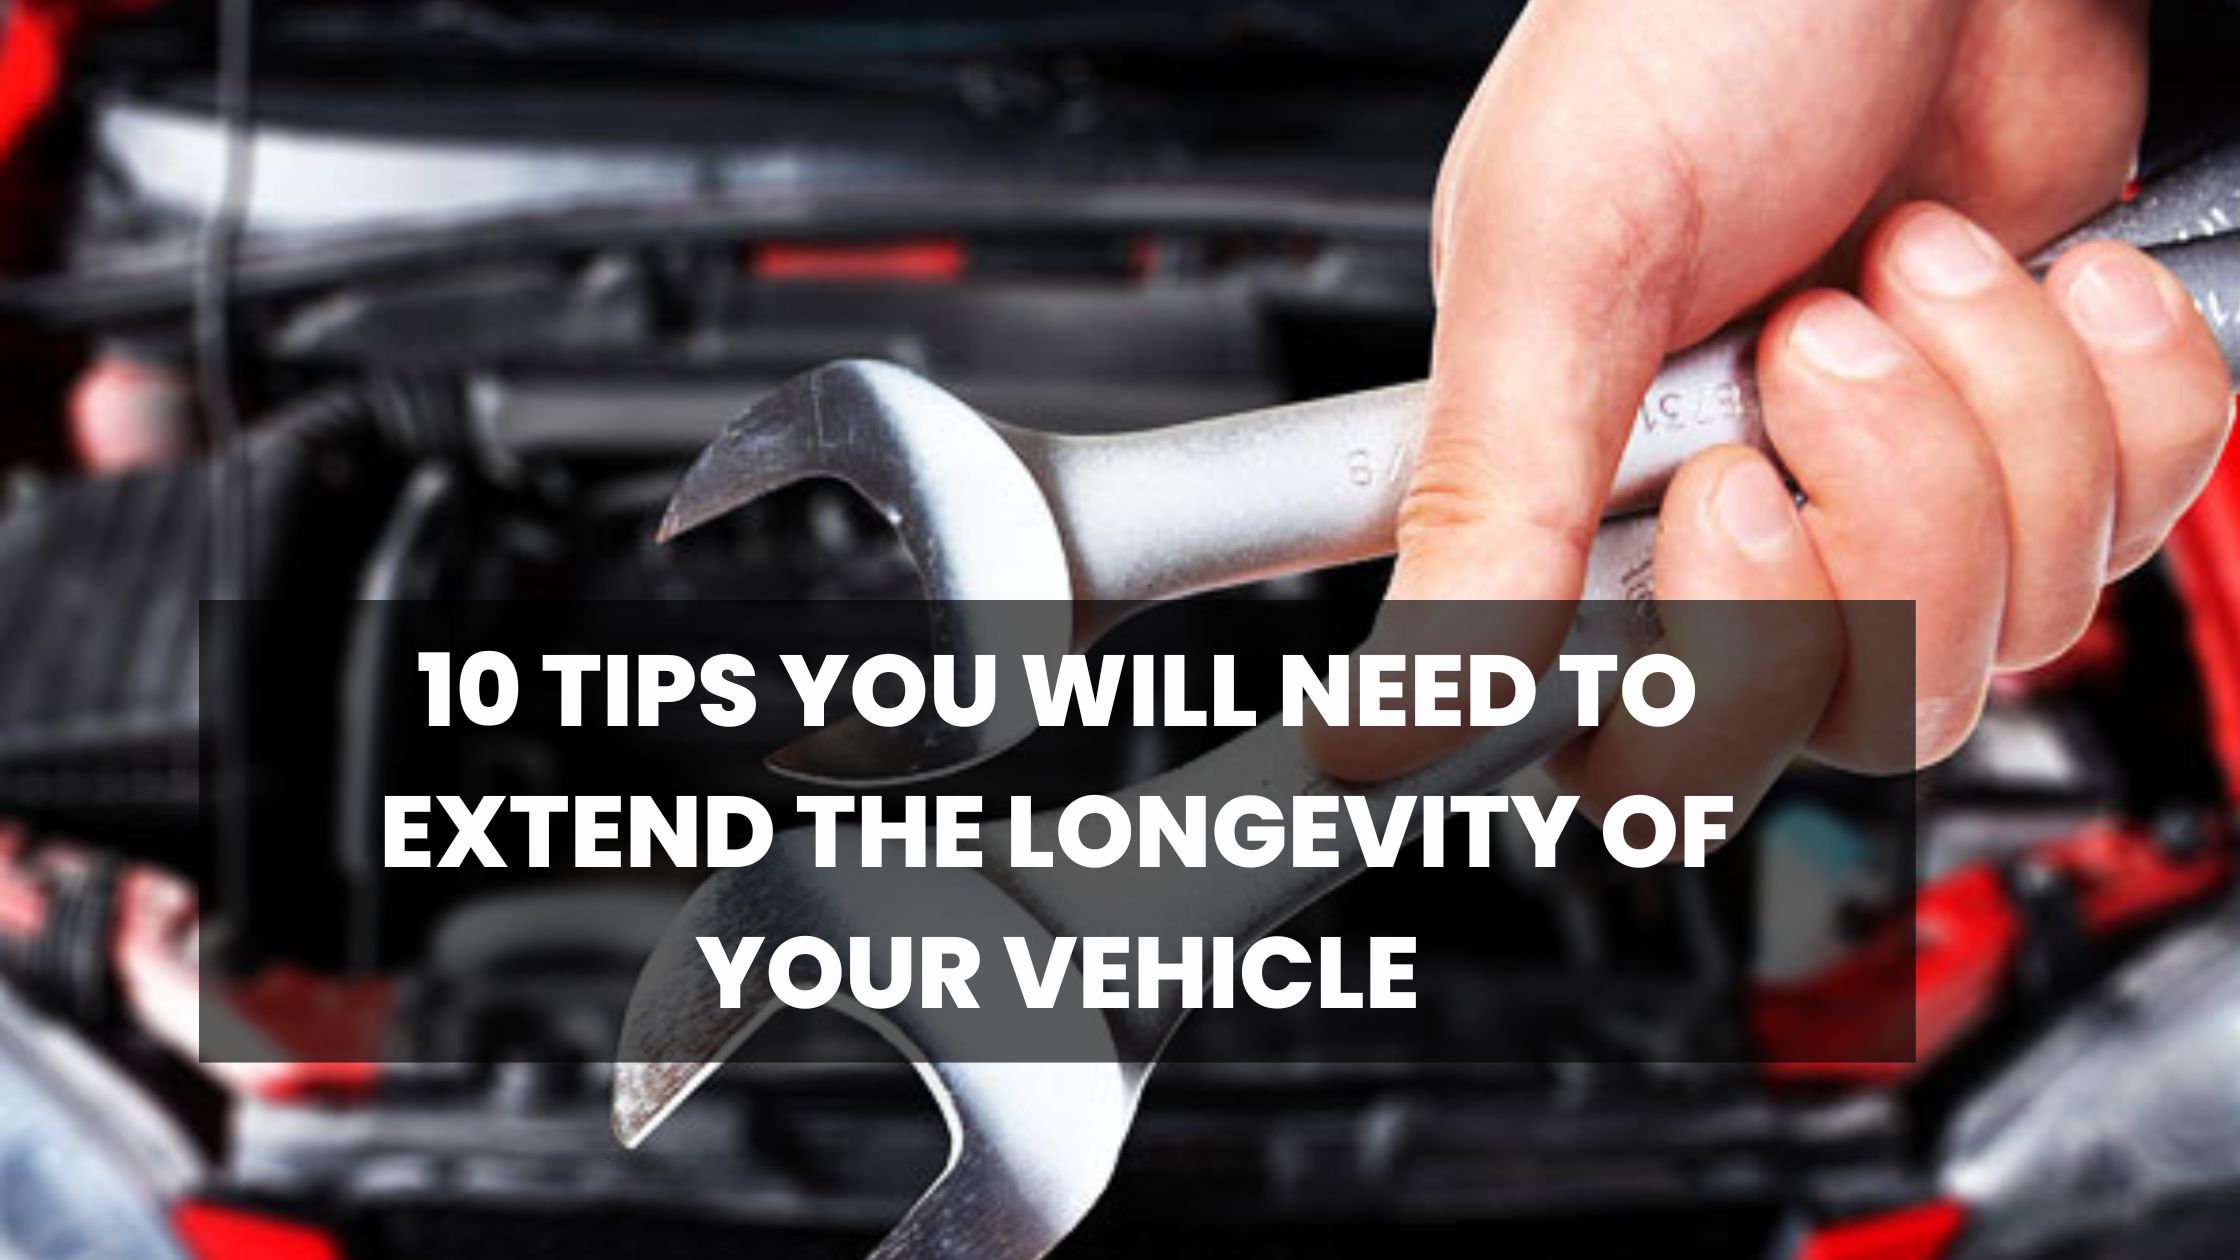 10 Tips You Will Need To Extend The Longevity Of Your Vehicle